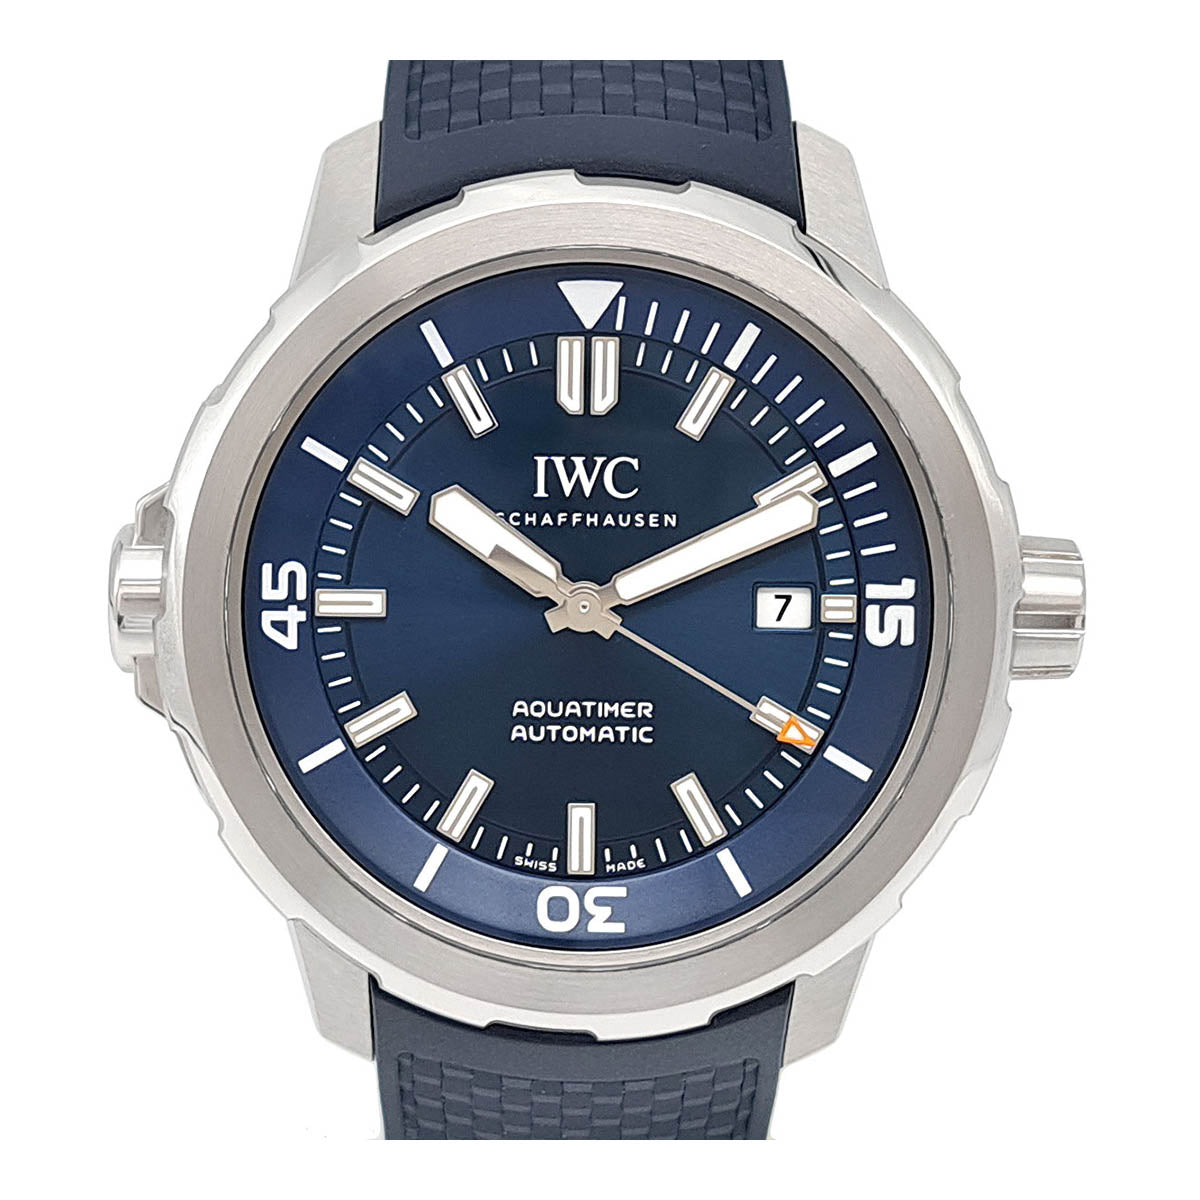 IWC Aquatimer Automatic Stainless Steel Men's Watch, Model IW328801 IW328801